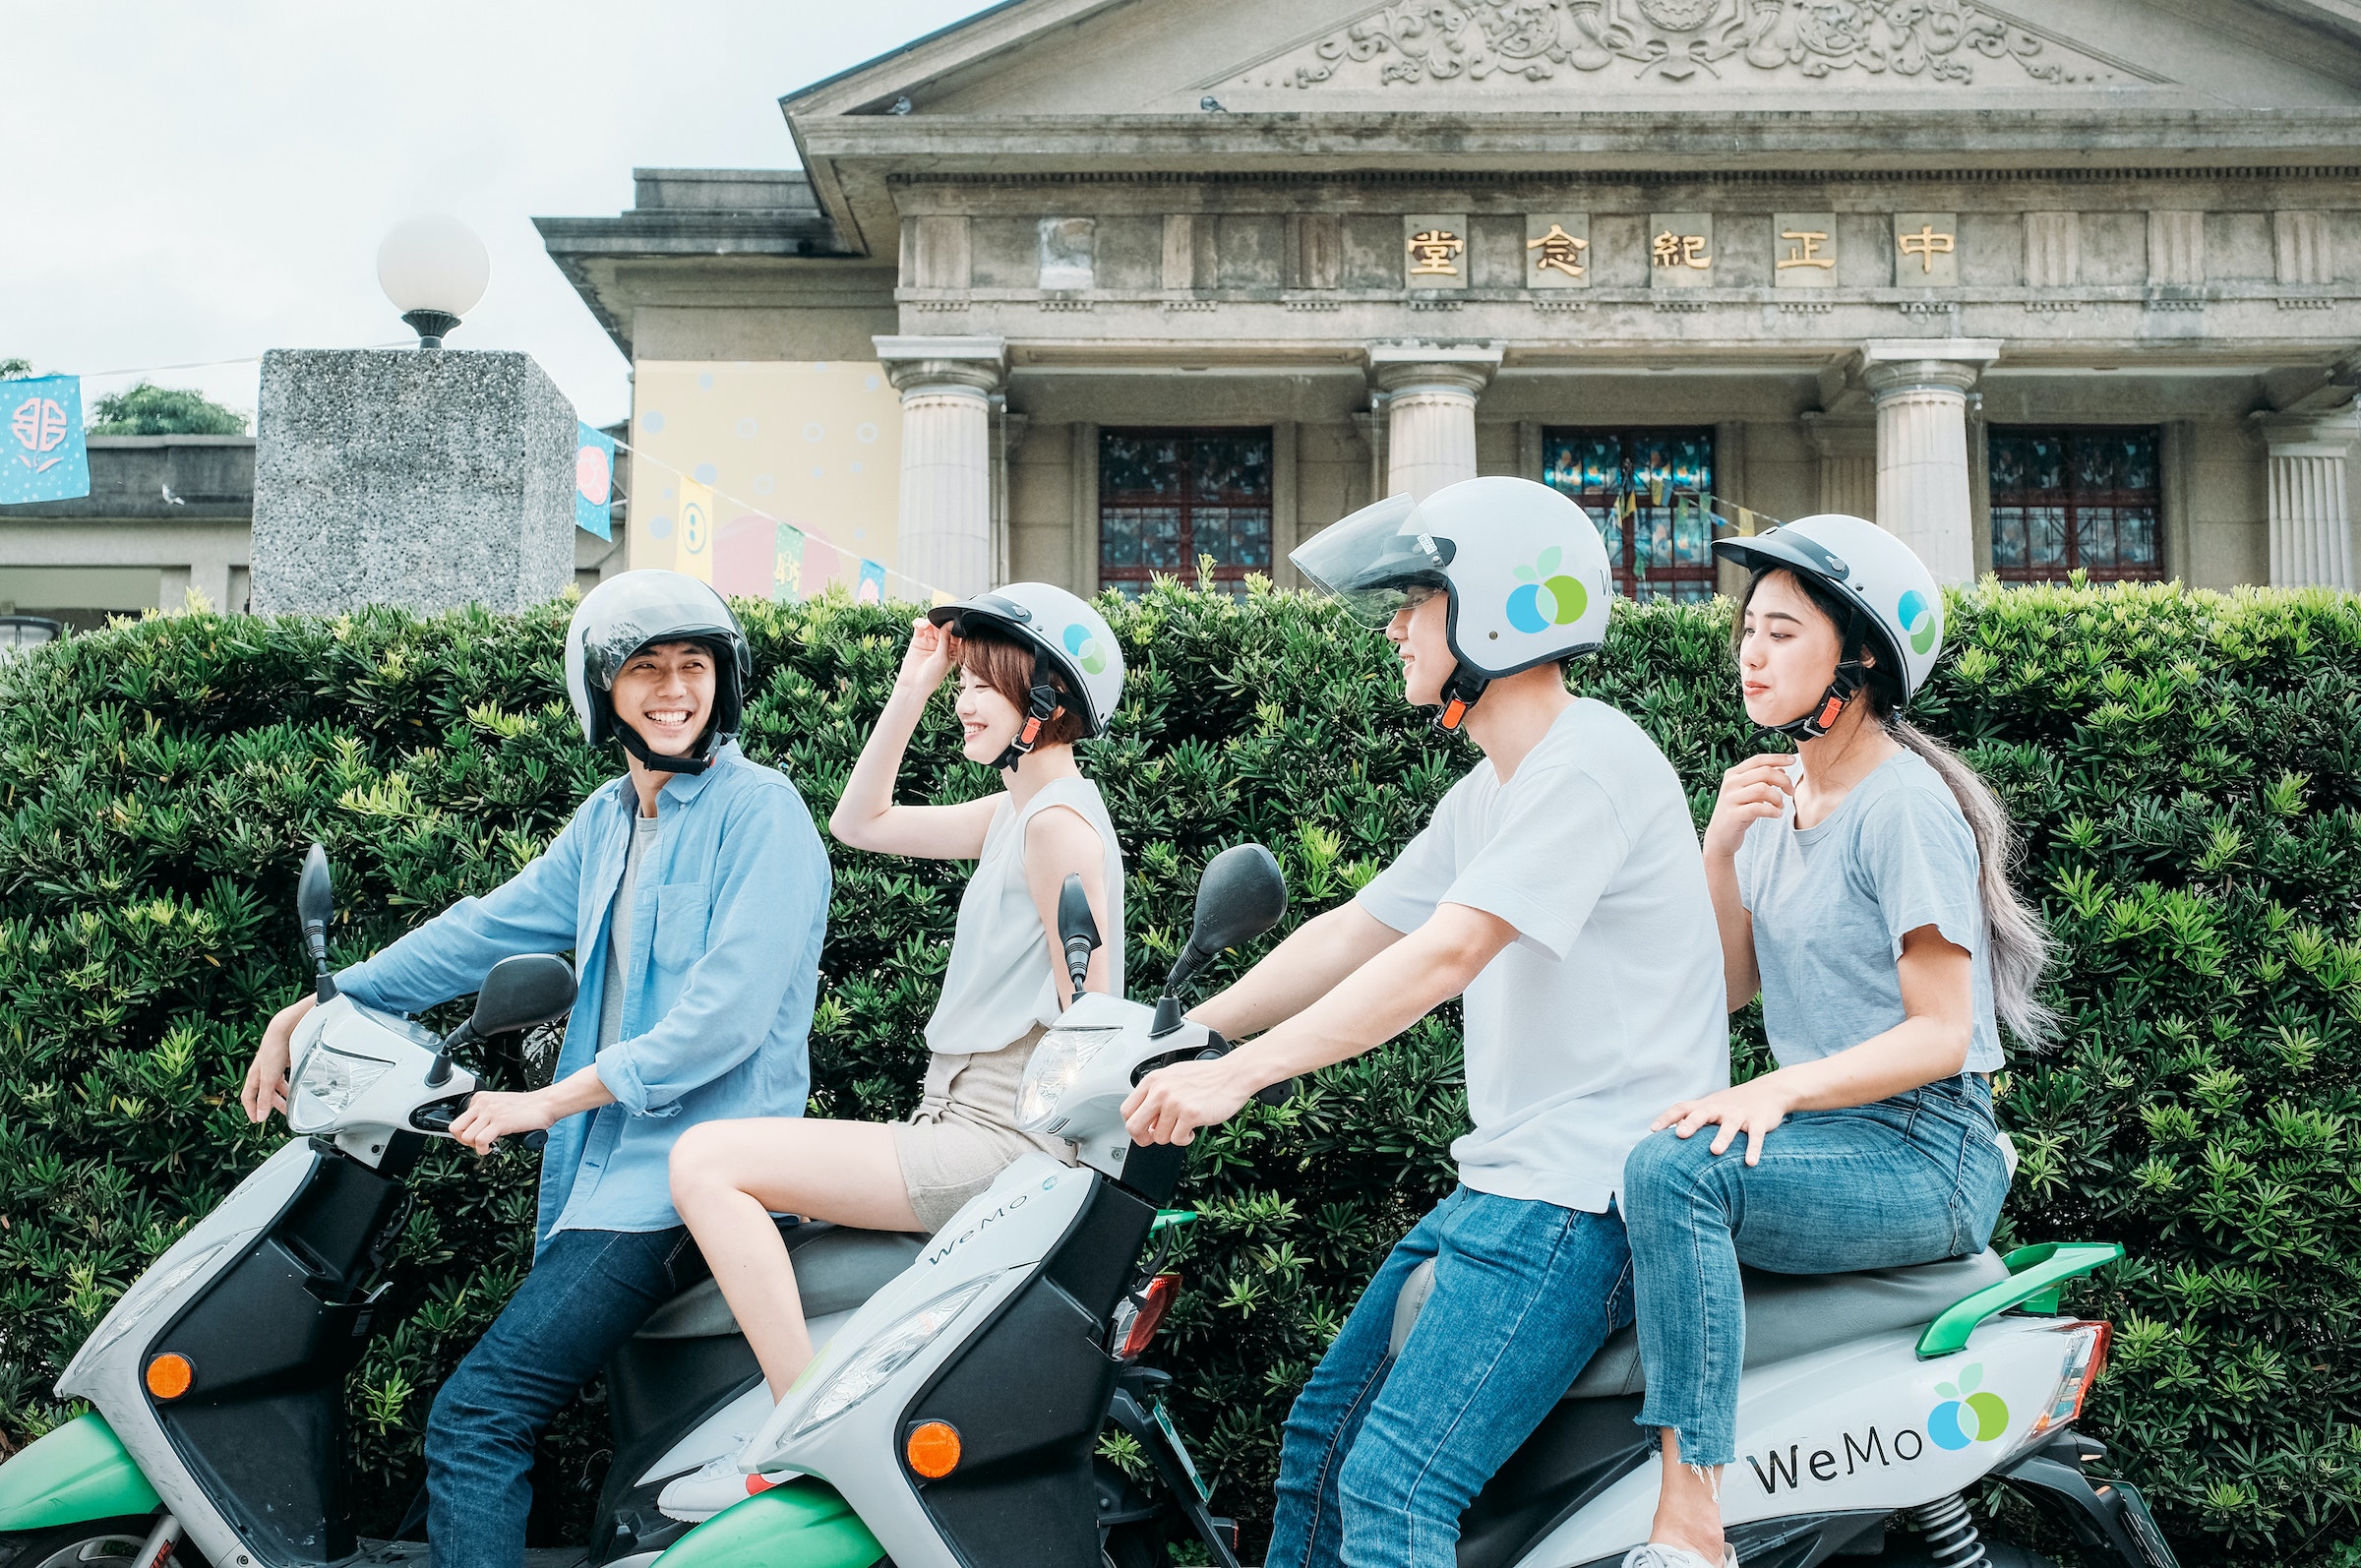 Banqiao District, WeMo Scooter, Xindian District, Car, Motorcycle, Electric motorcycles and scooters, , , World Car of the Year, WeMo Scooter 威摩科技, car, Green, Tourism, Vehicle, Helmet, Yellow, Bicycle, Personal protective equipment, Photography, Vacation, Scooter